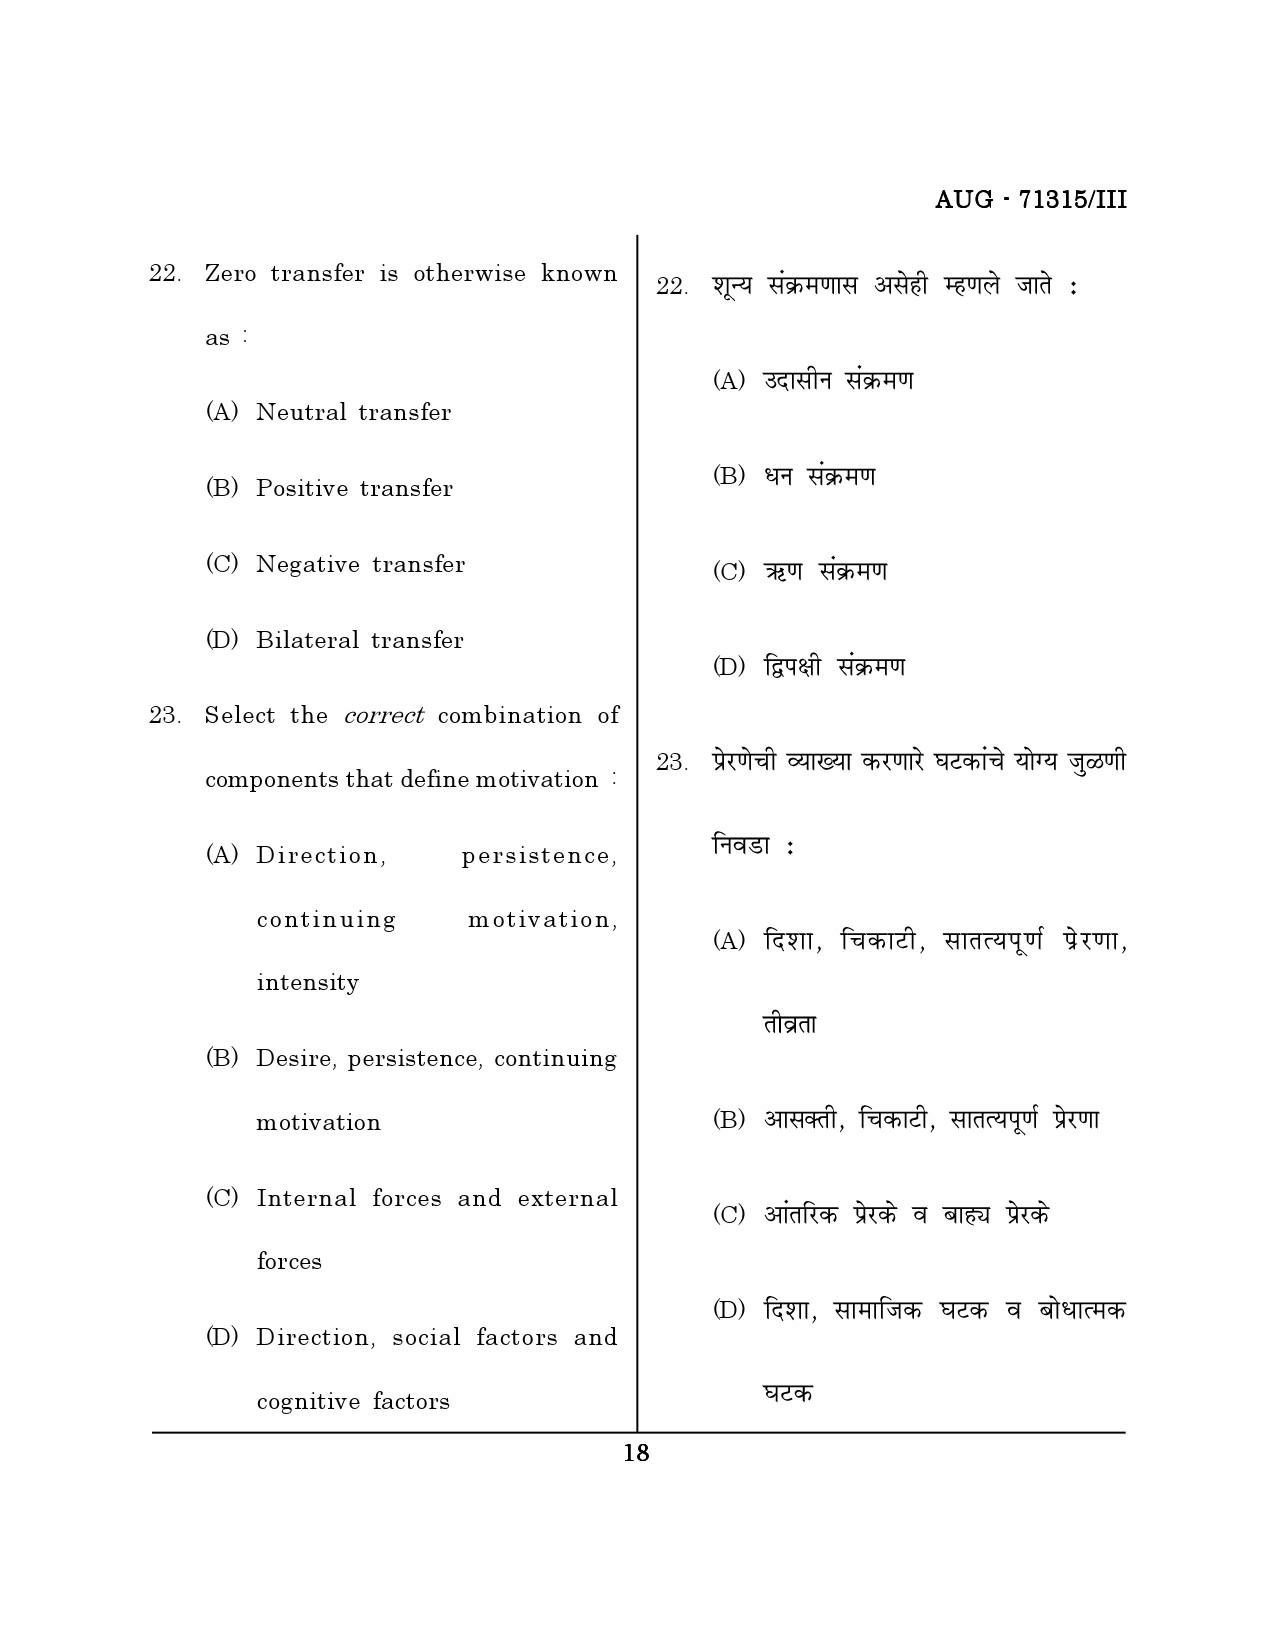 Maharashtra SET Physical Education Question Paper III August 2015 17